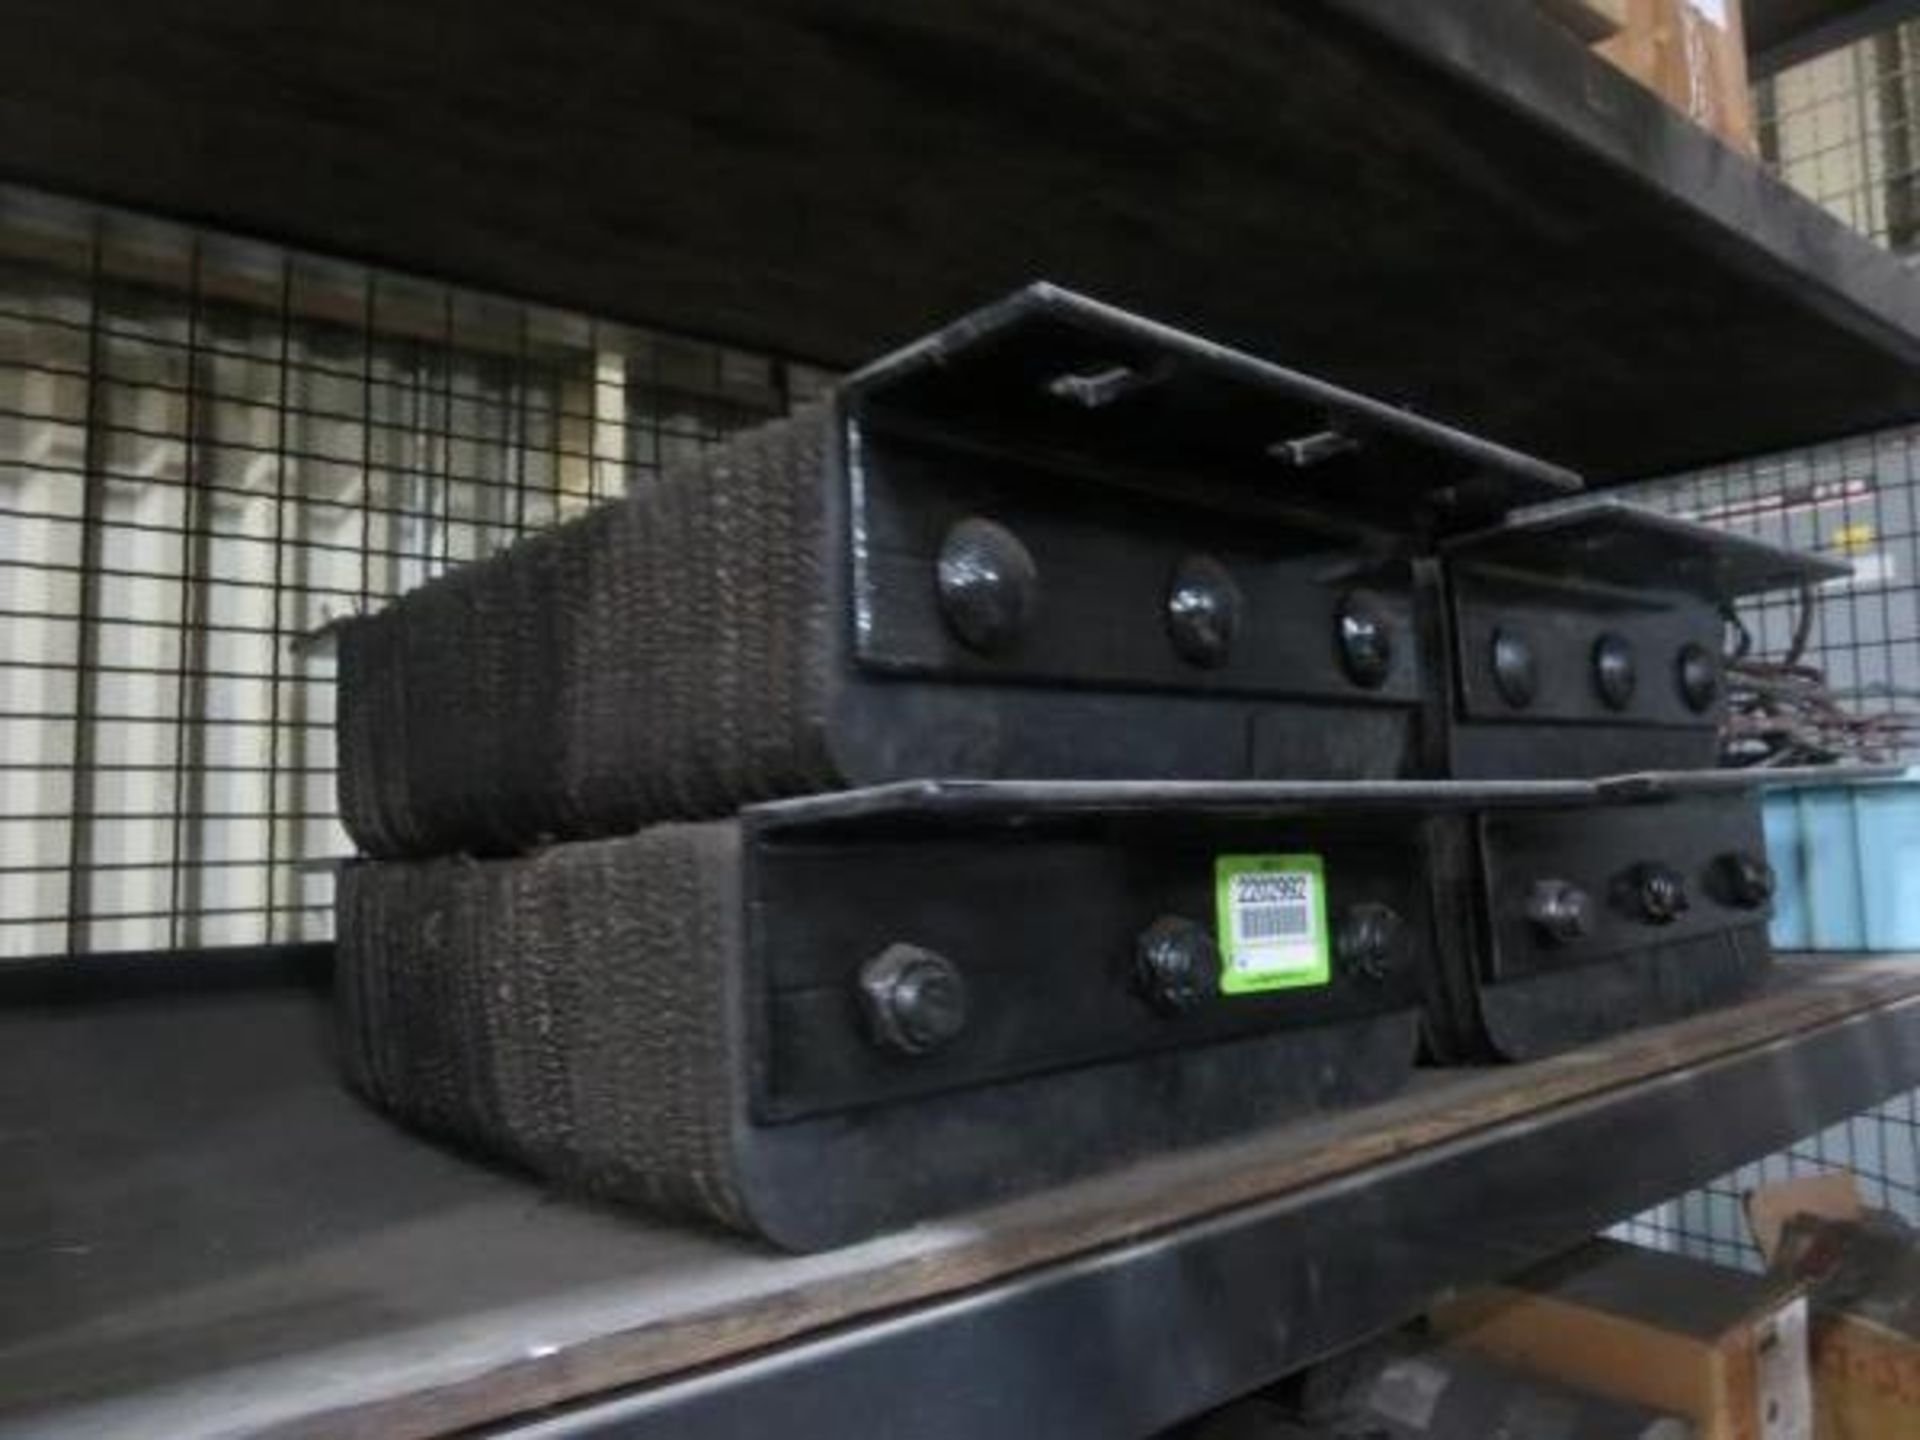 Lot (4) Dock Bumpers. Hit # 2202992. Bldg.1 Cage. Asset Located at 820 S Post Rd, Indianapolis, IN